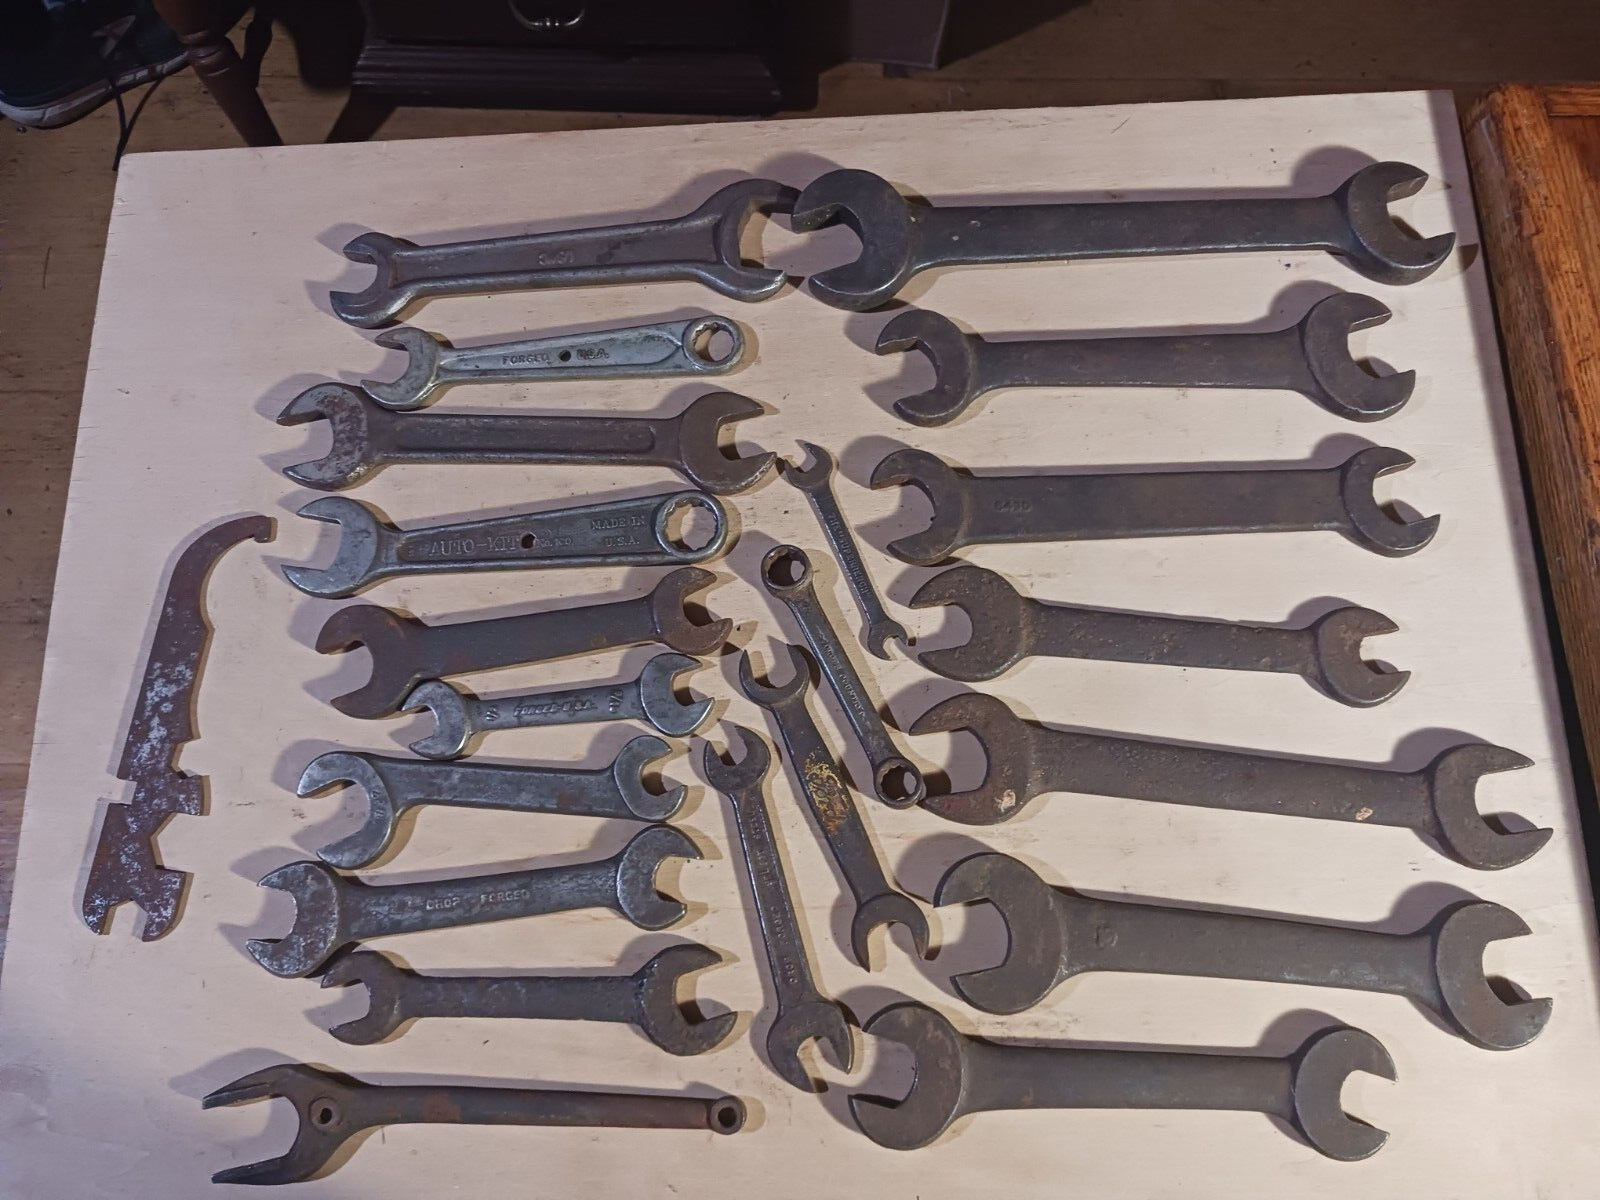 Lot of 21 Antique Vintage Open End Mechanic Wrenches Rusty Steam Punk